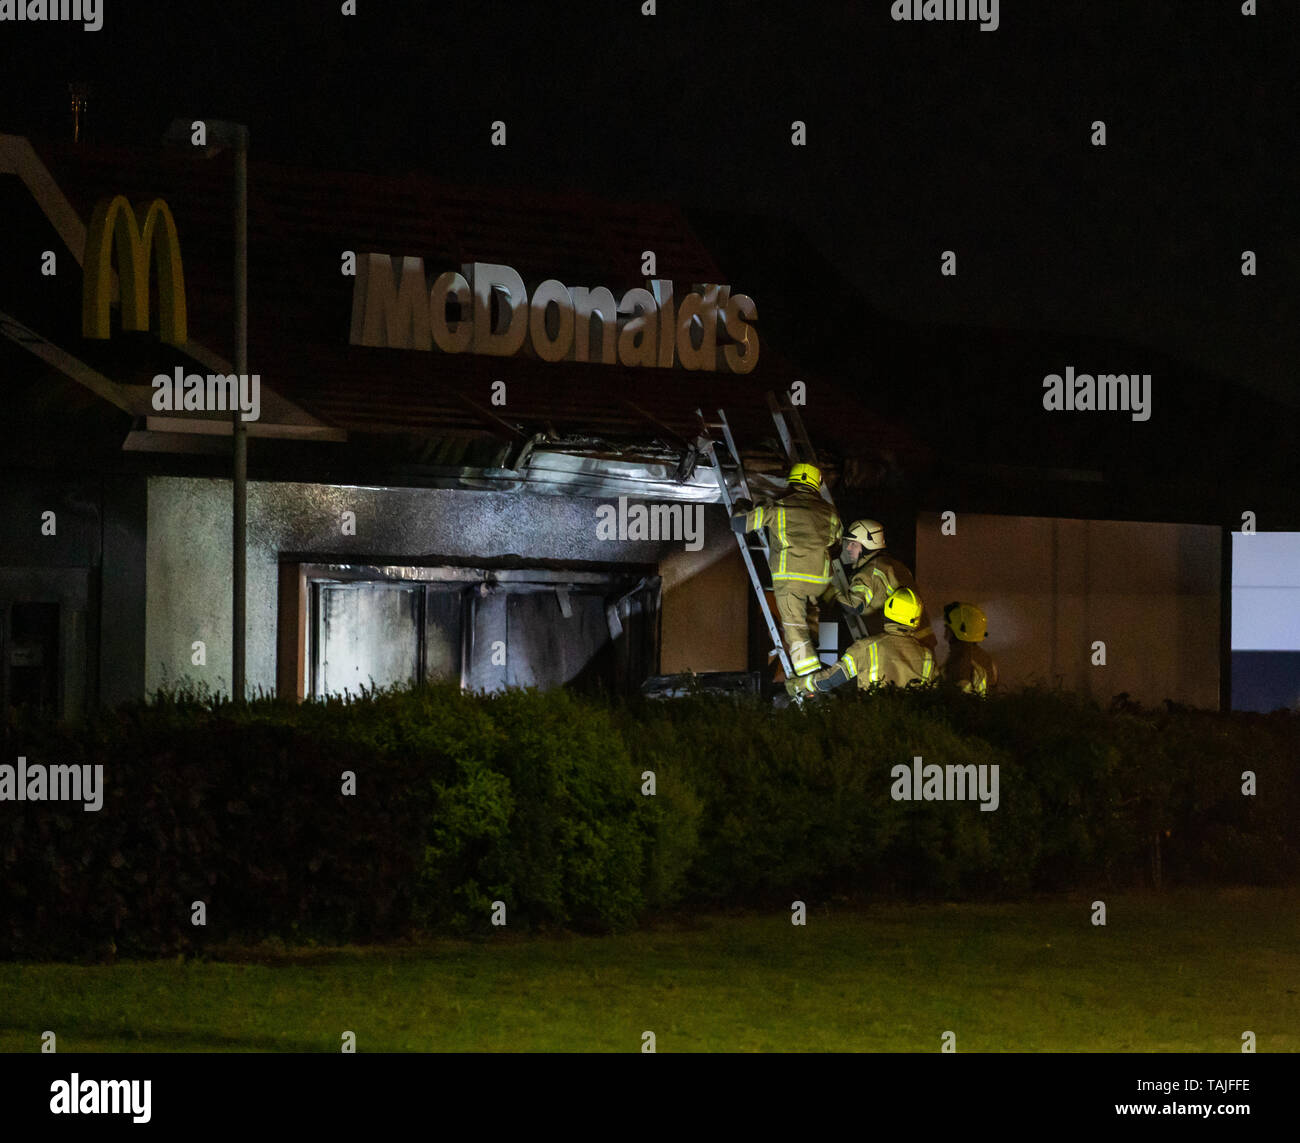 McDonalds Drive Thru, 2 Linkwood Place, Elgin, Moray, UK. 25th May, 2019. IV30 1HZ. On Saturday night a Fiat Car went on fire within the Drive Thru Part of Elgin's McDonald Restaurant. The car was totally destroyed and there was severe damage to the restaurant exterior. Credit: JASPERIMAGE/Alamy Live News Stock Photo